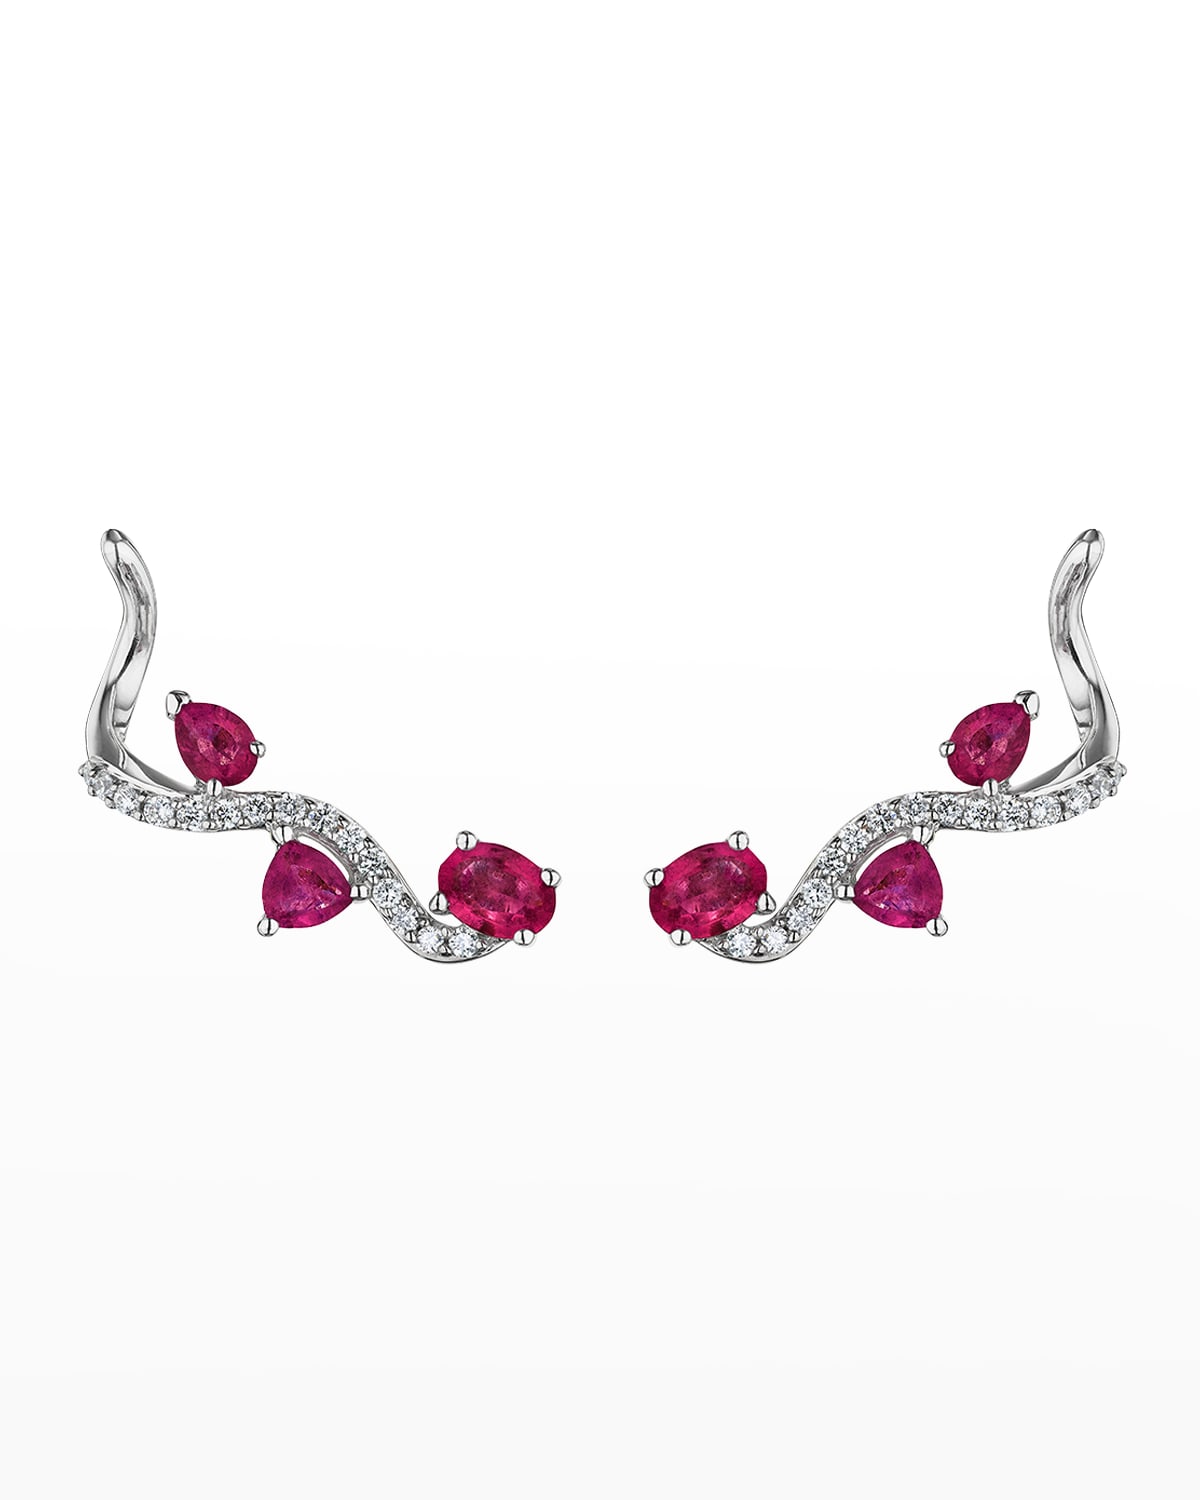 Mirage White Gold Earrings with Diamonds and Rubies